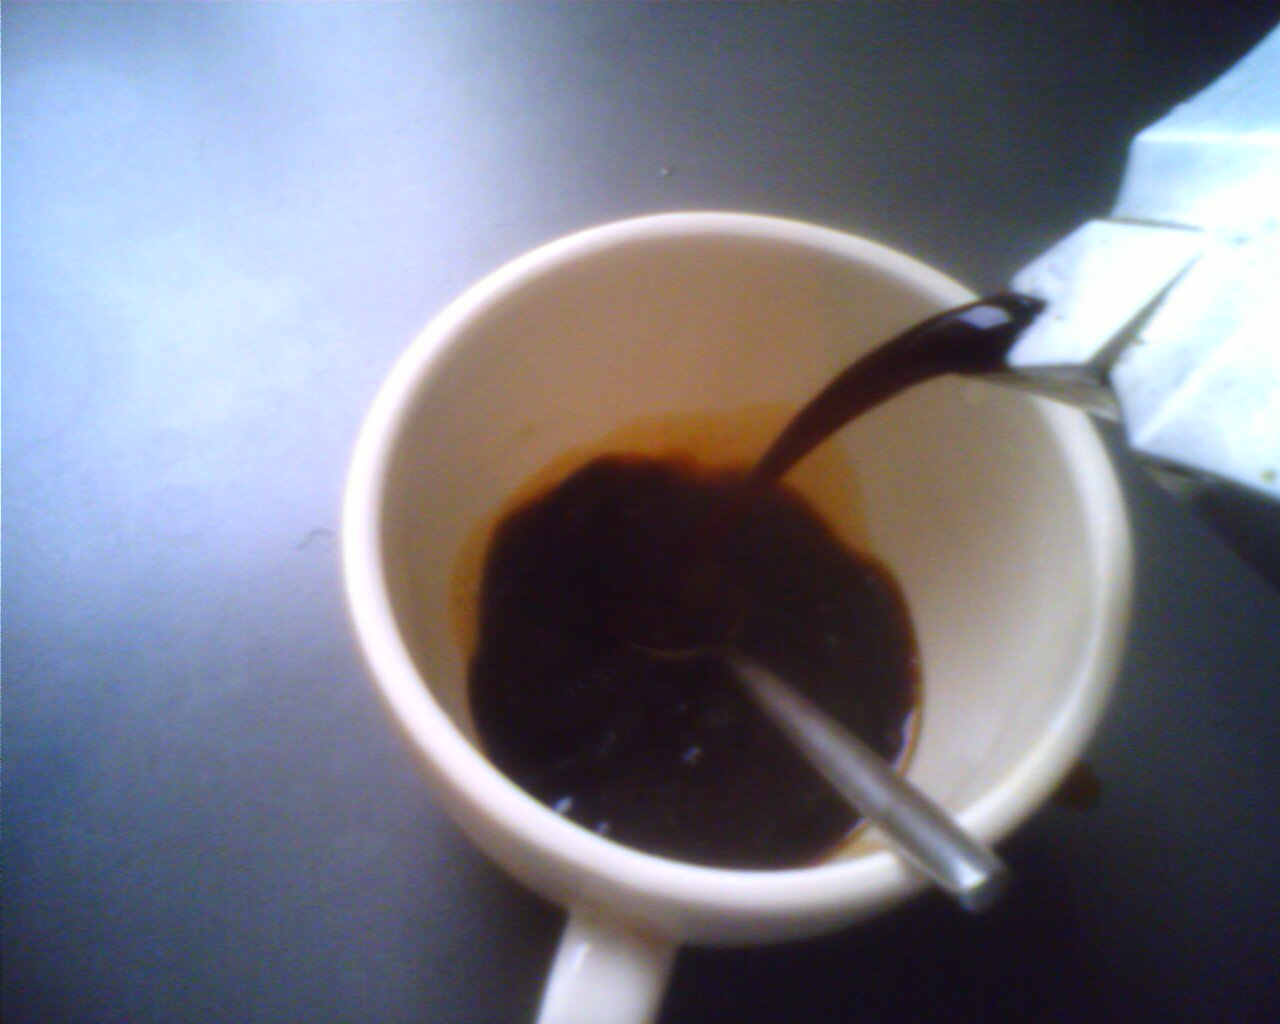 a spoon sitting in a coffee cup filled with brown liquid